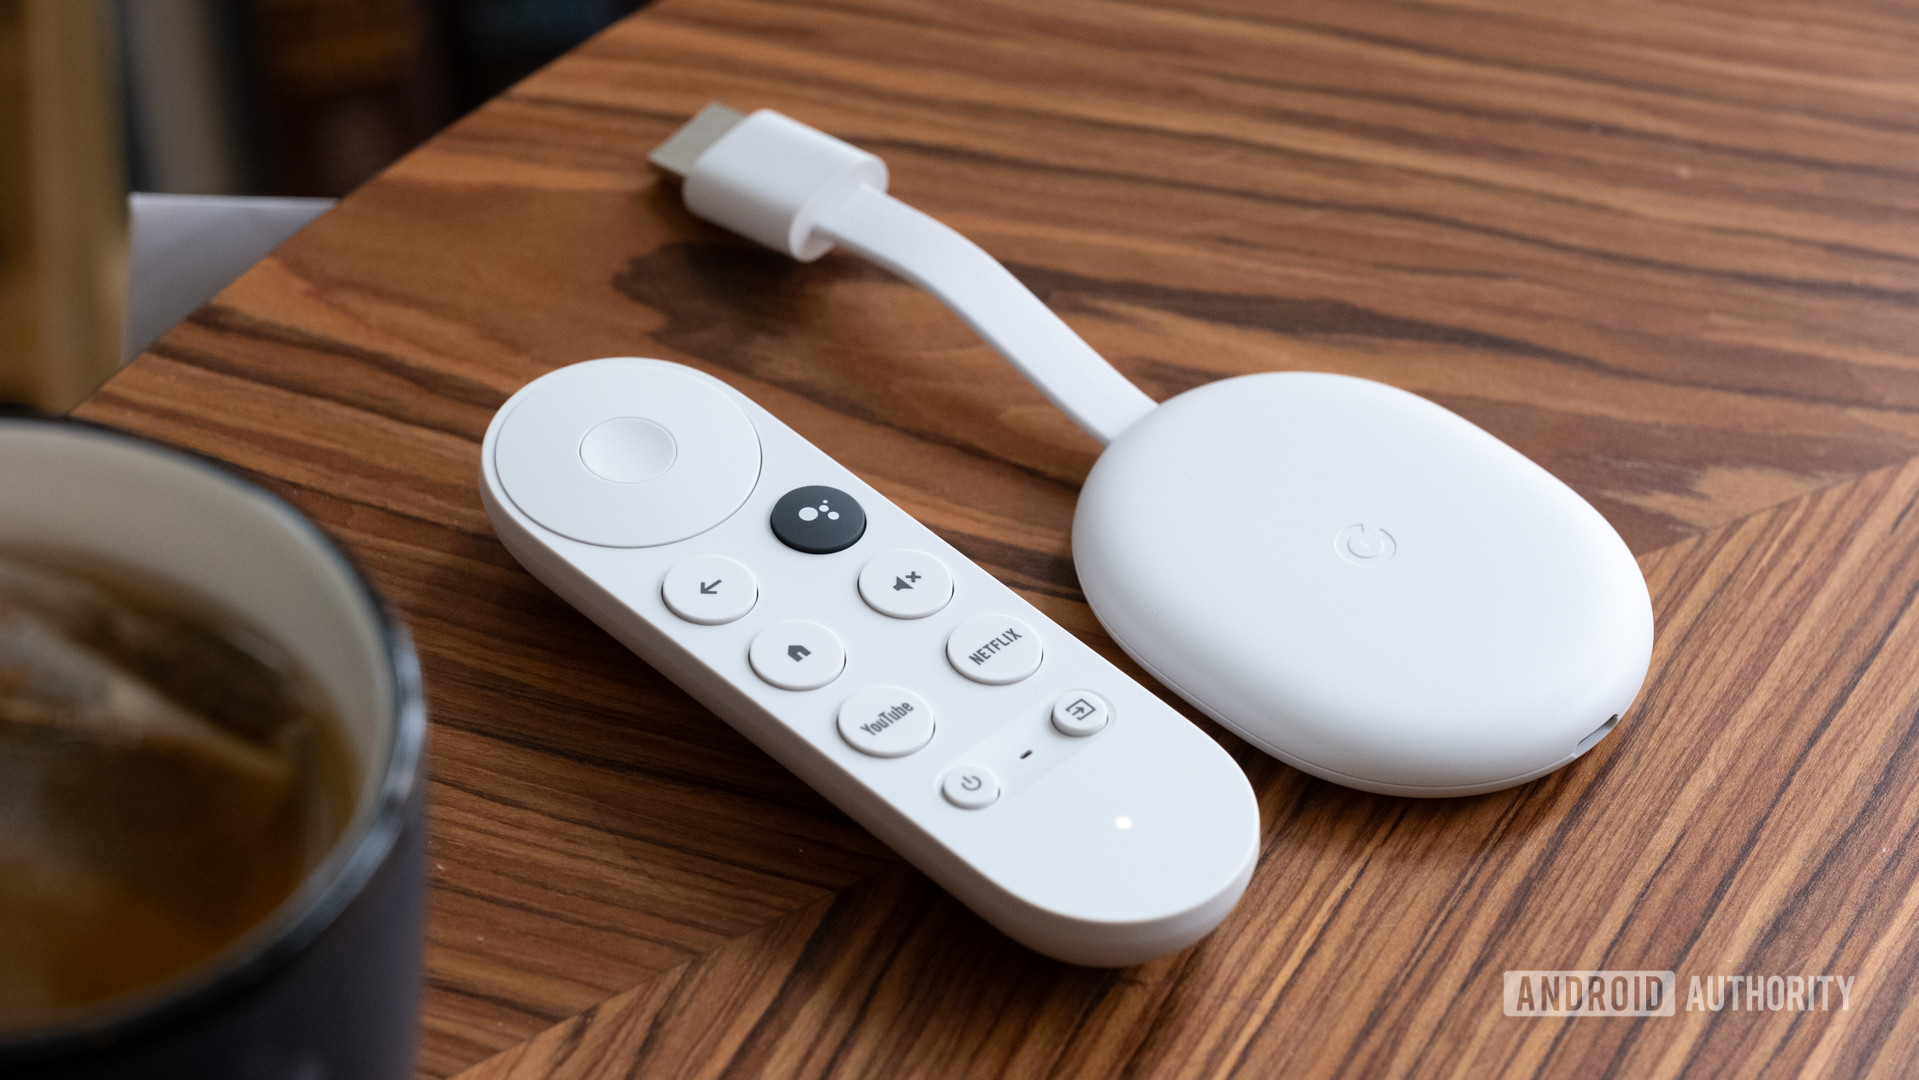 New with Google TV for 2022 in works? Android